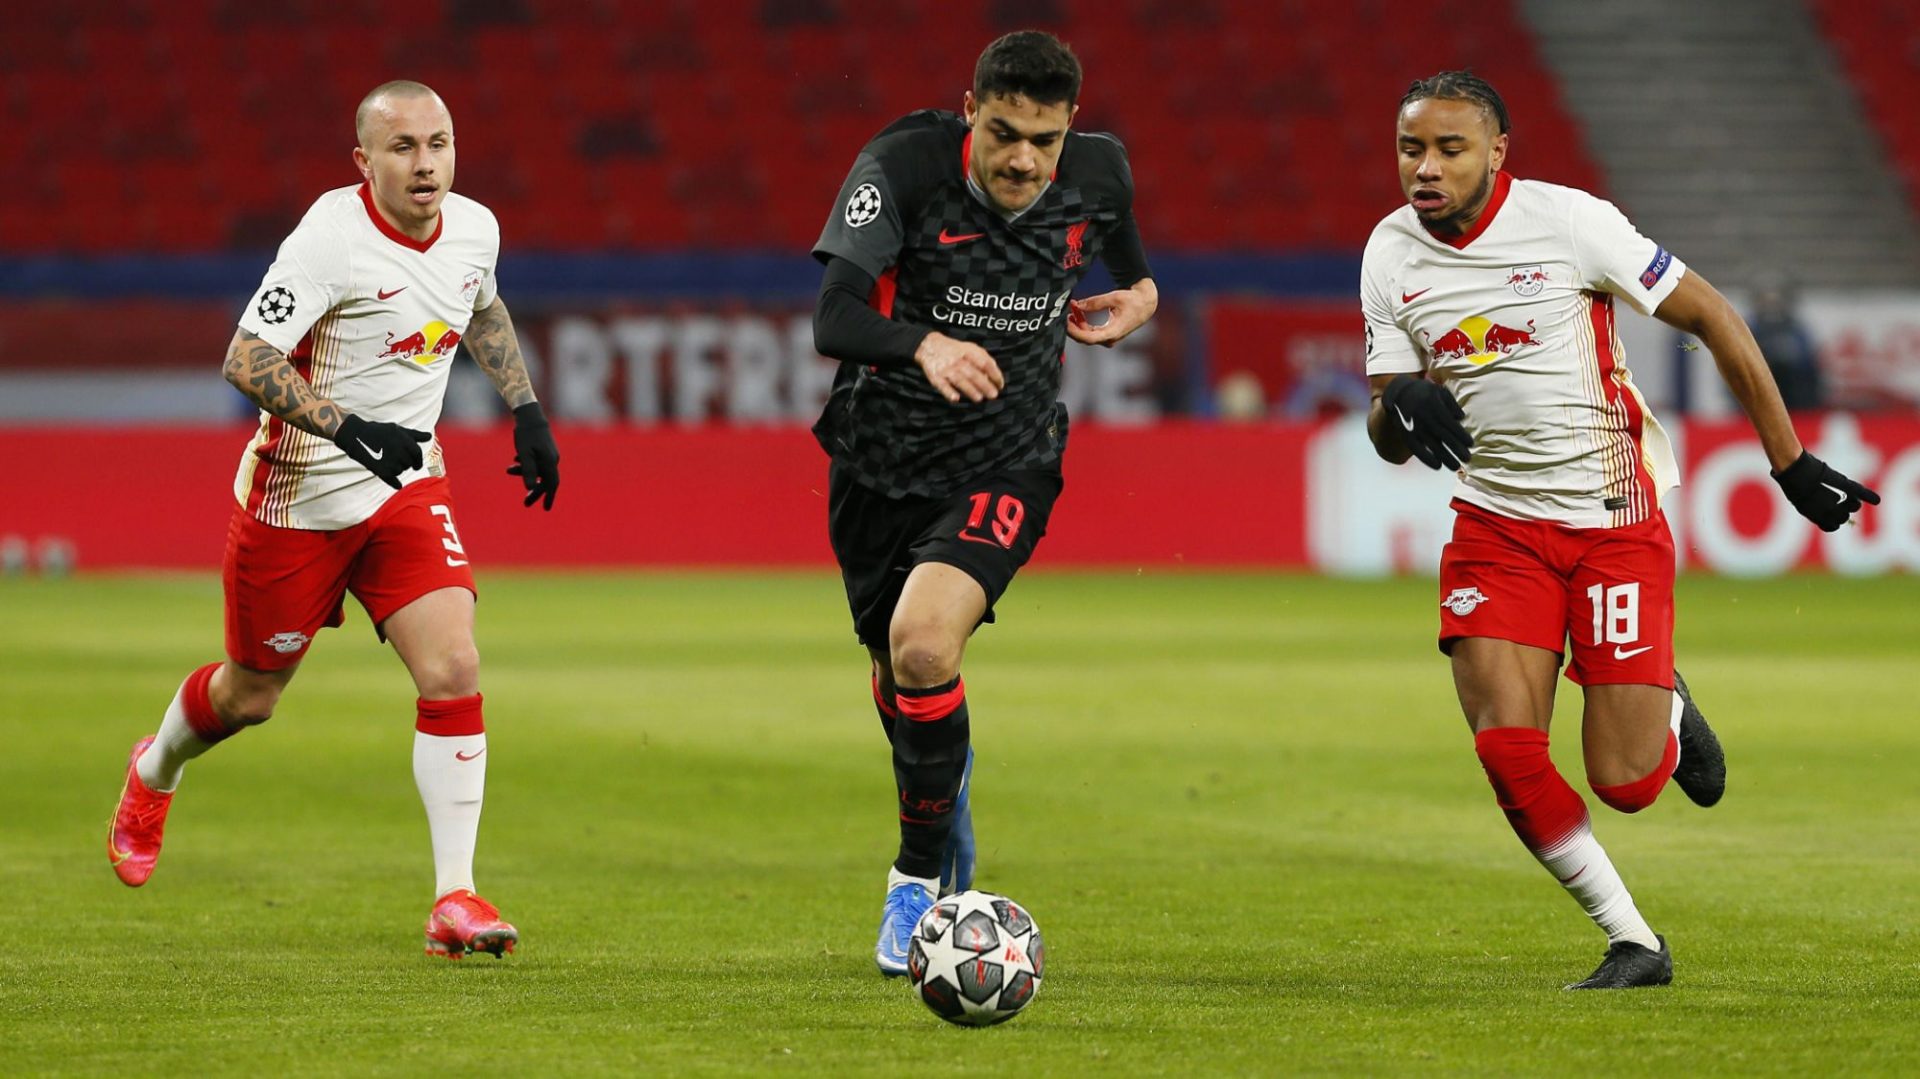 Ozan Kabak shows on ‘particular’ night as Liverpool closed in on quarter-finals